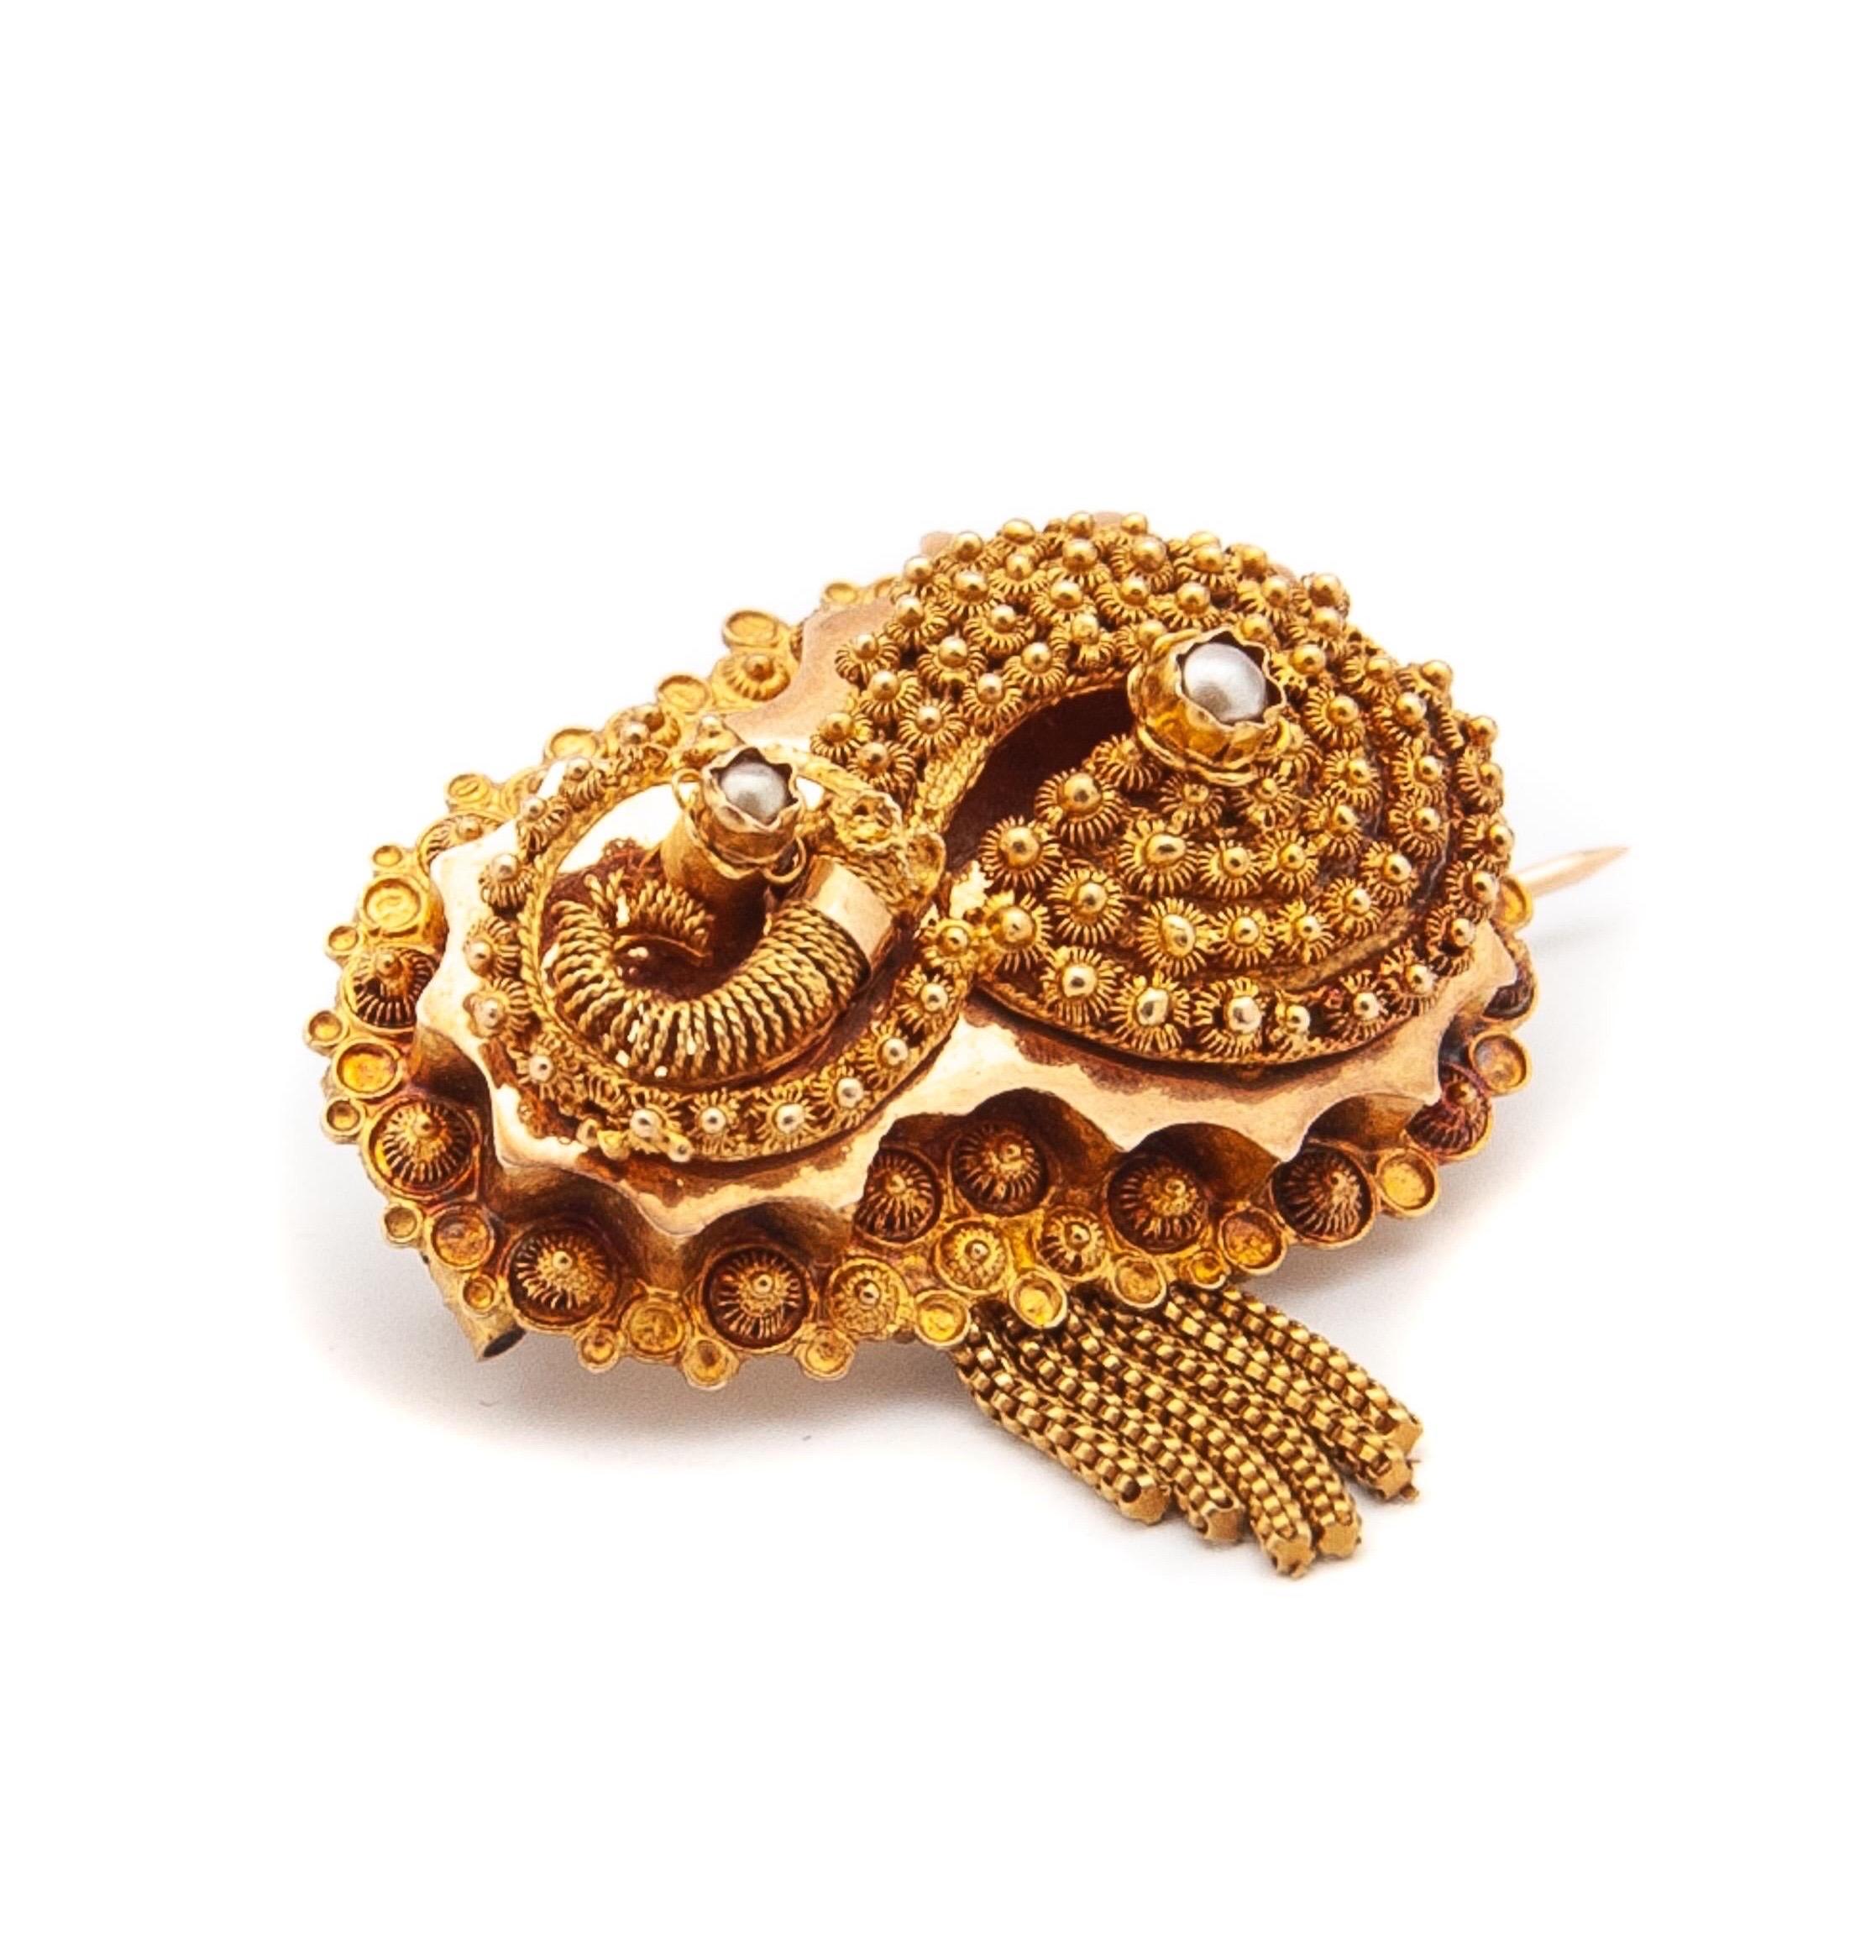 An antique cannetille brooch created in 14 karat yellow gold. The brooch is embellished with a texture of firm and fine lacy spiral gold thread and beading. Between the spiral cannetille knots, two seed pearls are placed and a gold spiral wire in